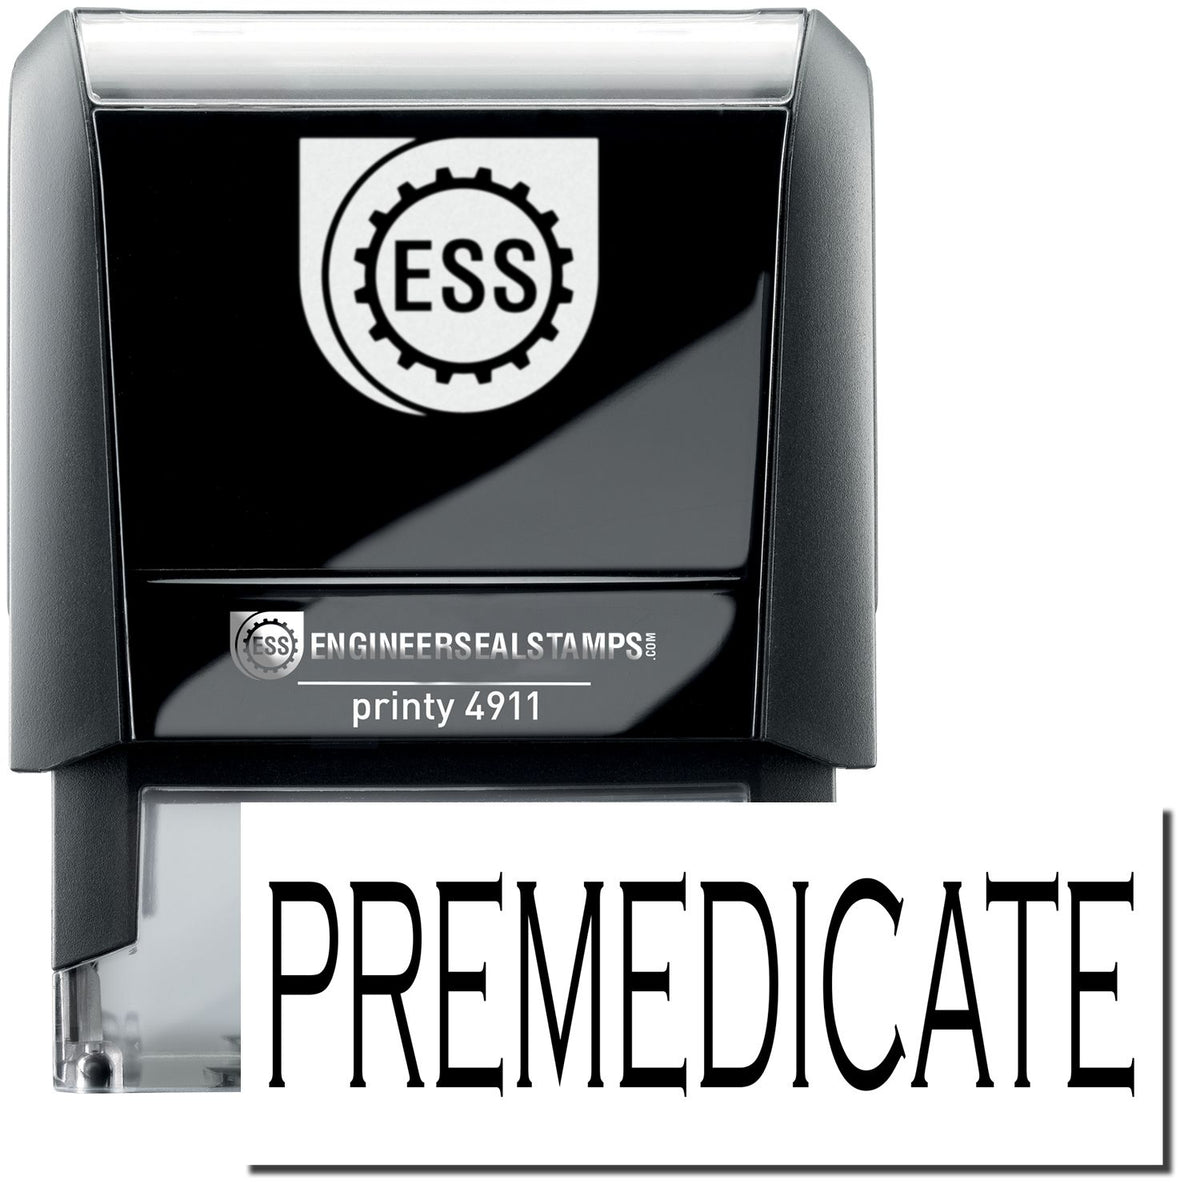 A self-inking stamp with a stamped image showing how the text &quot;PREMEDICATE&quot; is displayed after stamping.